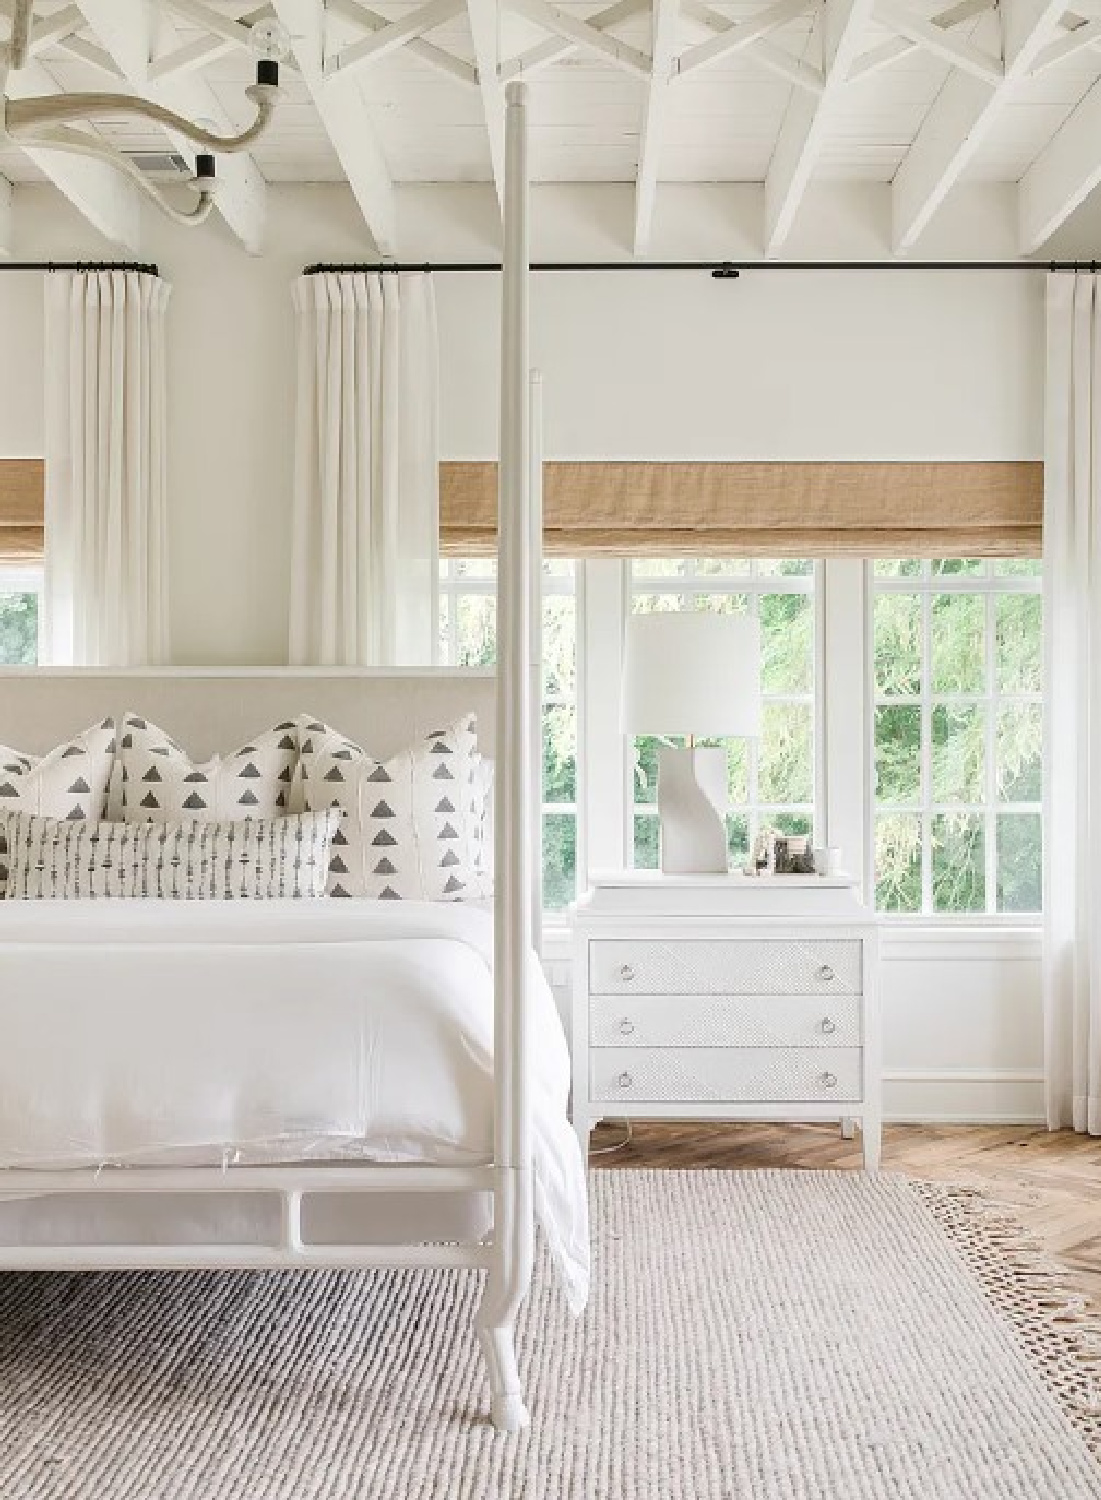 White bedroom in Kate Marker's 1920 white stucco Barrington Hills, IL Home (160 N. Buckley Rd) with modern, serene, unfussy, timeless interiors. #katemarkerinteriors @thedawnmckennagroup #katemarkerhome